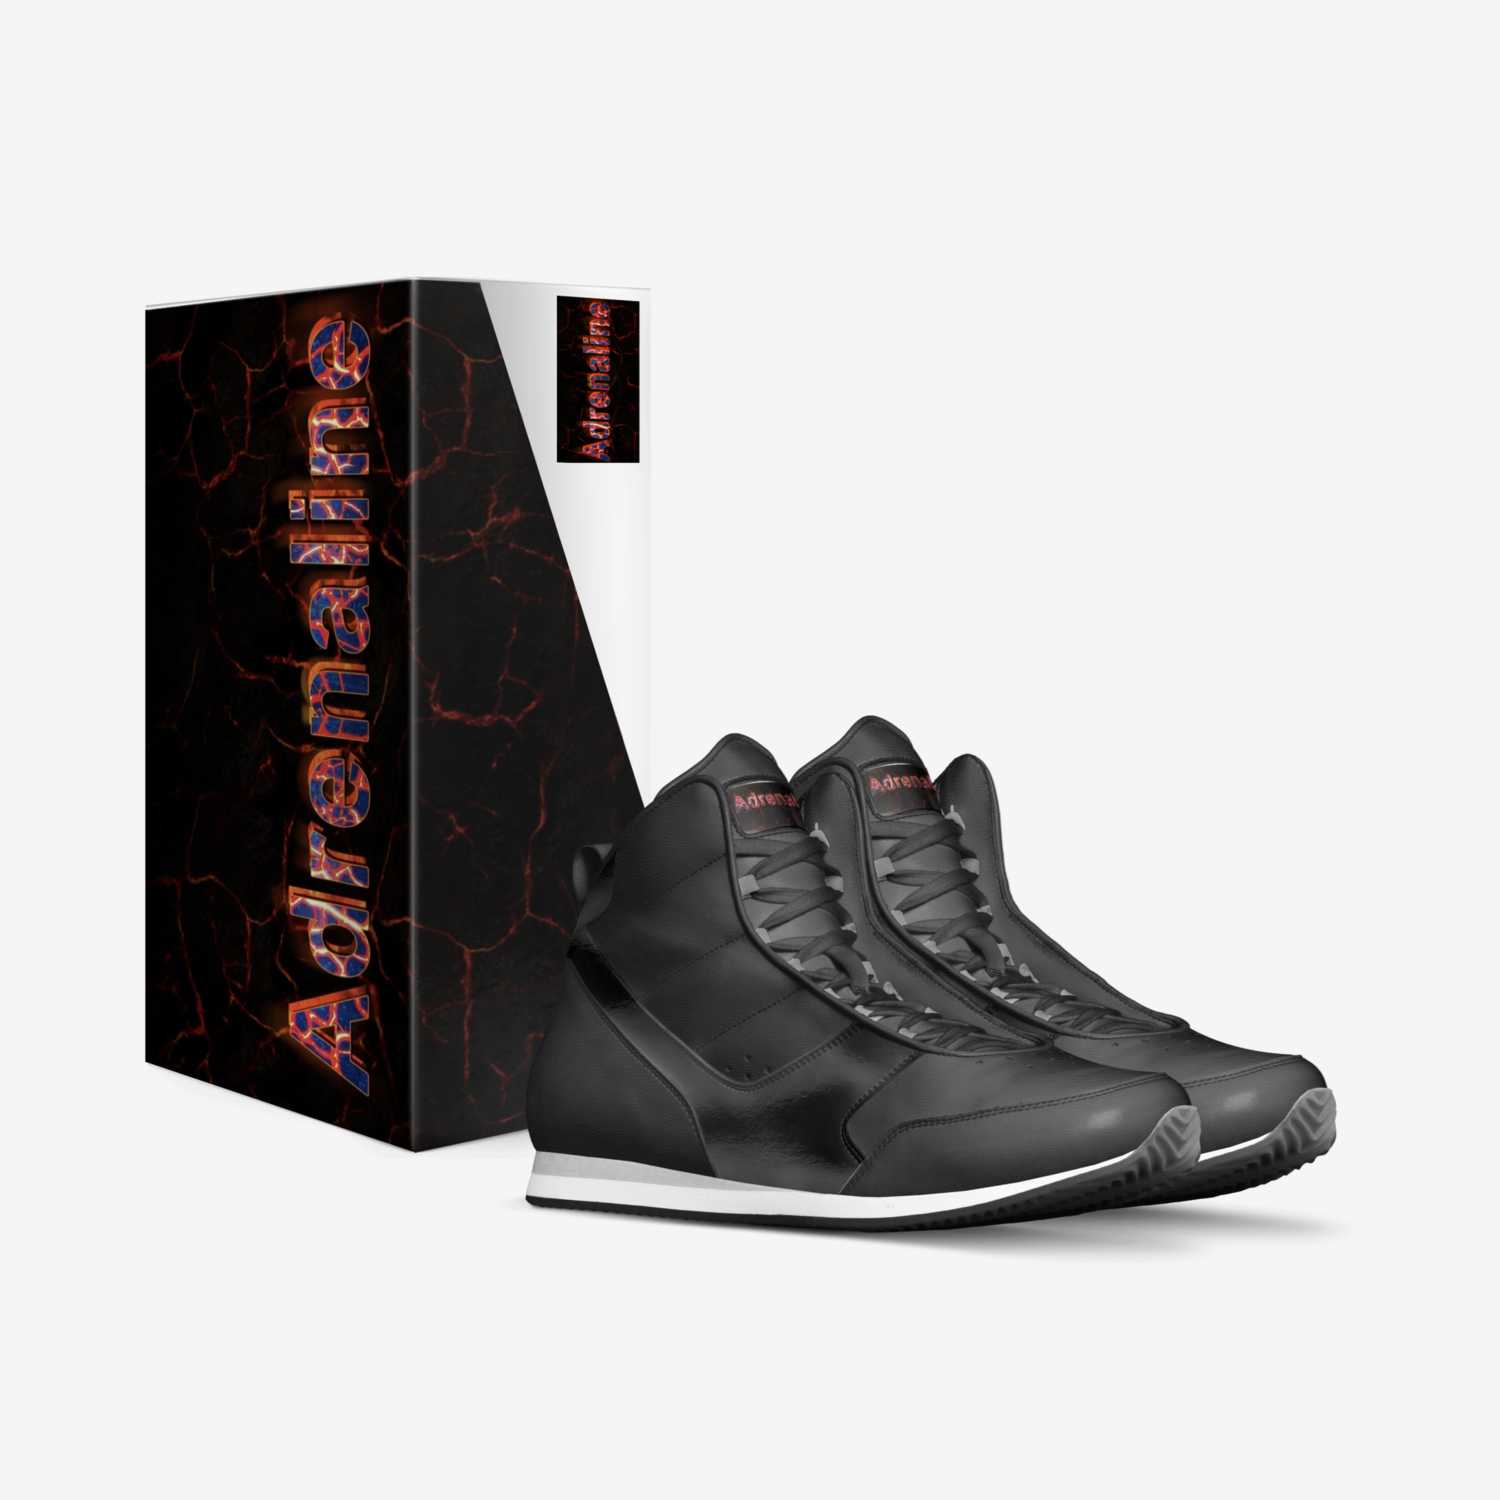 ADRENALINE  custom made in Italy shoes by Larry Tha Volkano | Box view